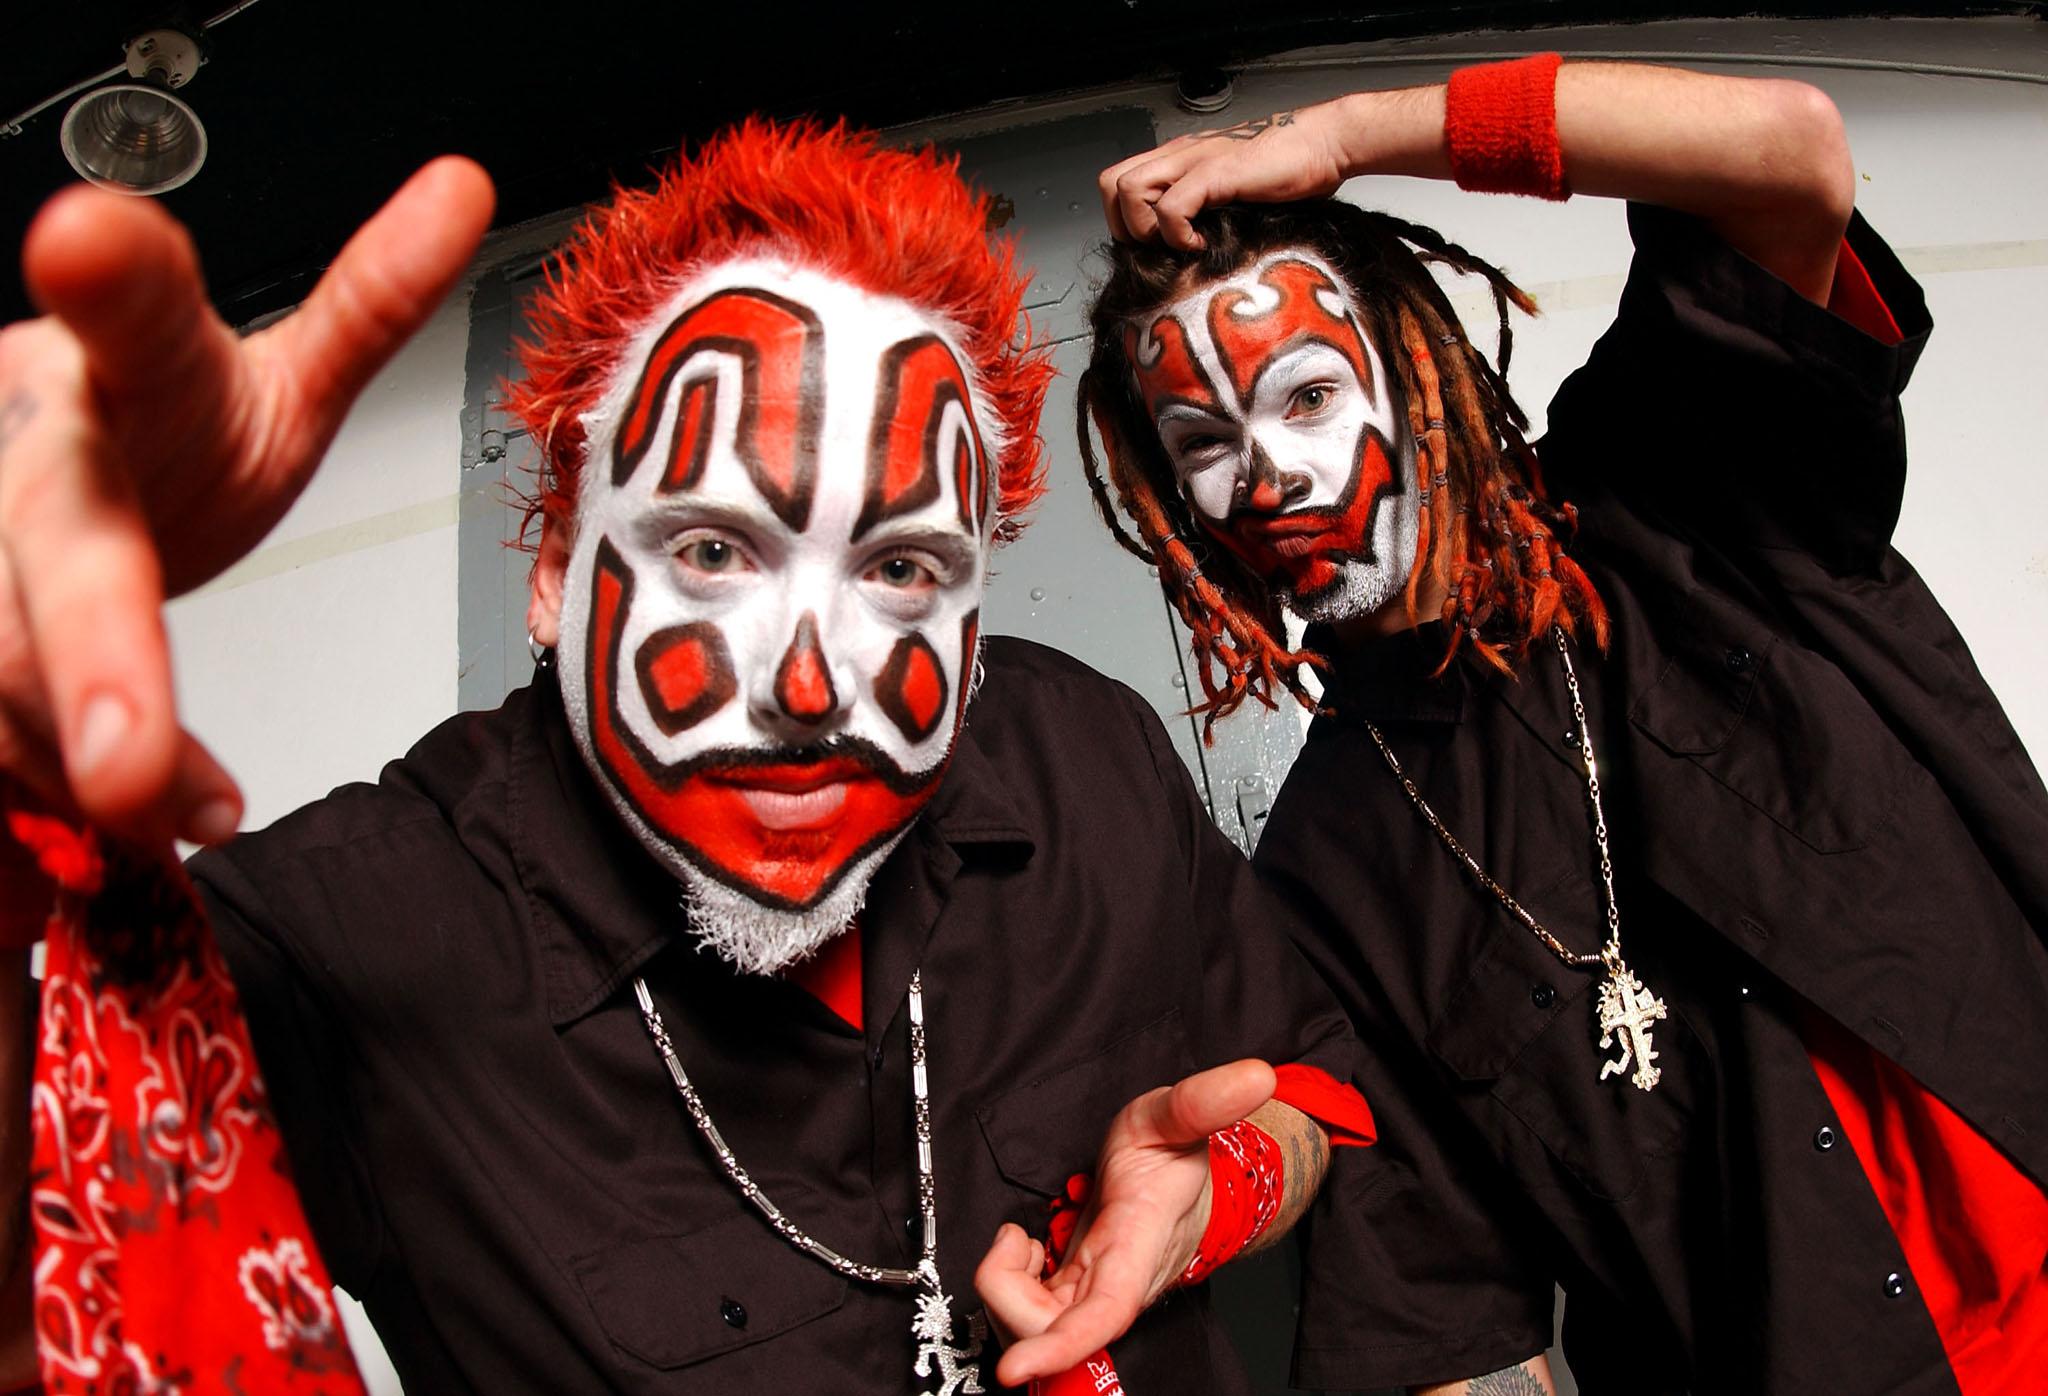 Insane Clown Pose are suing the Justice Department and the Feberal Bureau of Investigation